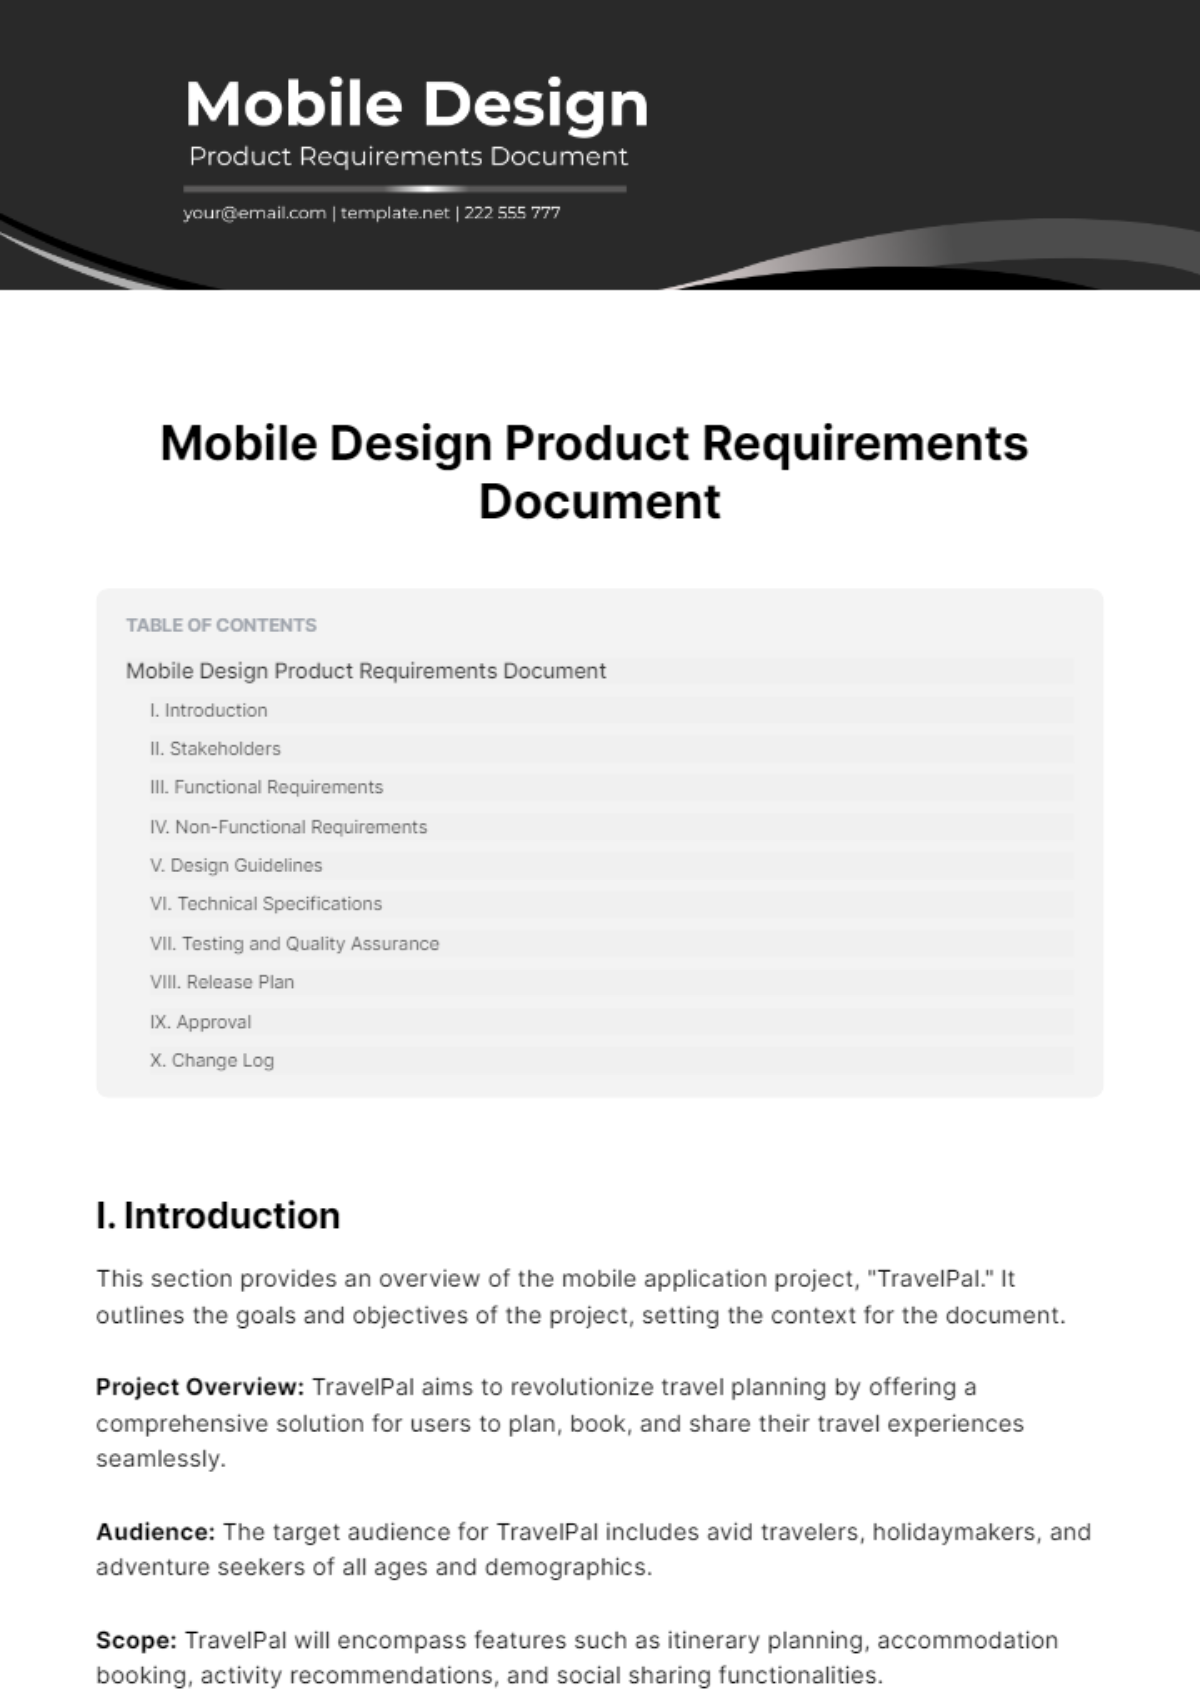 Mobile Design Product Requirements Document Template